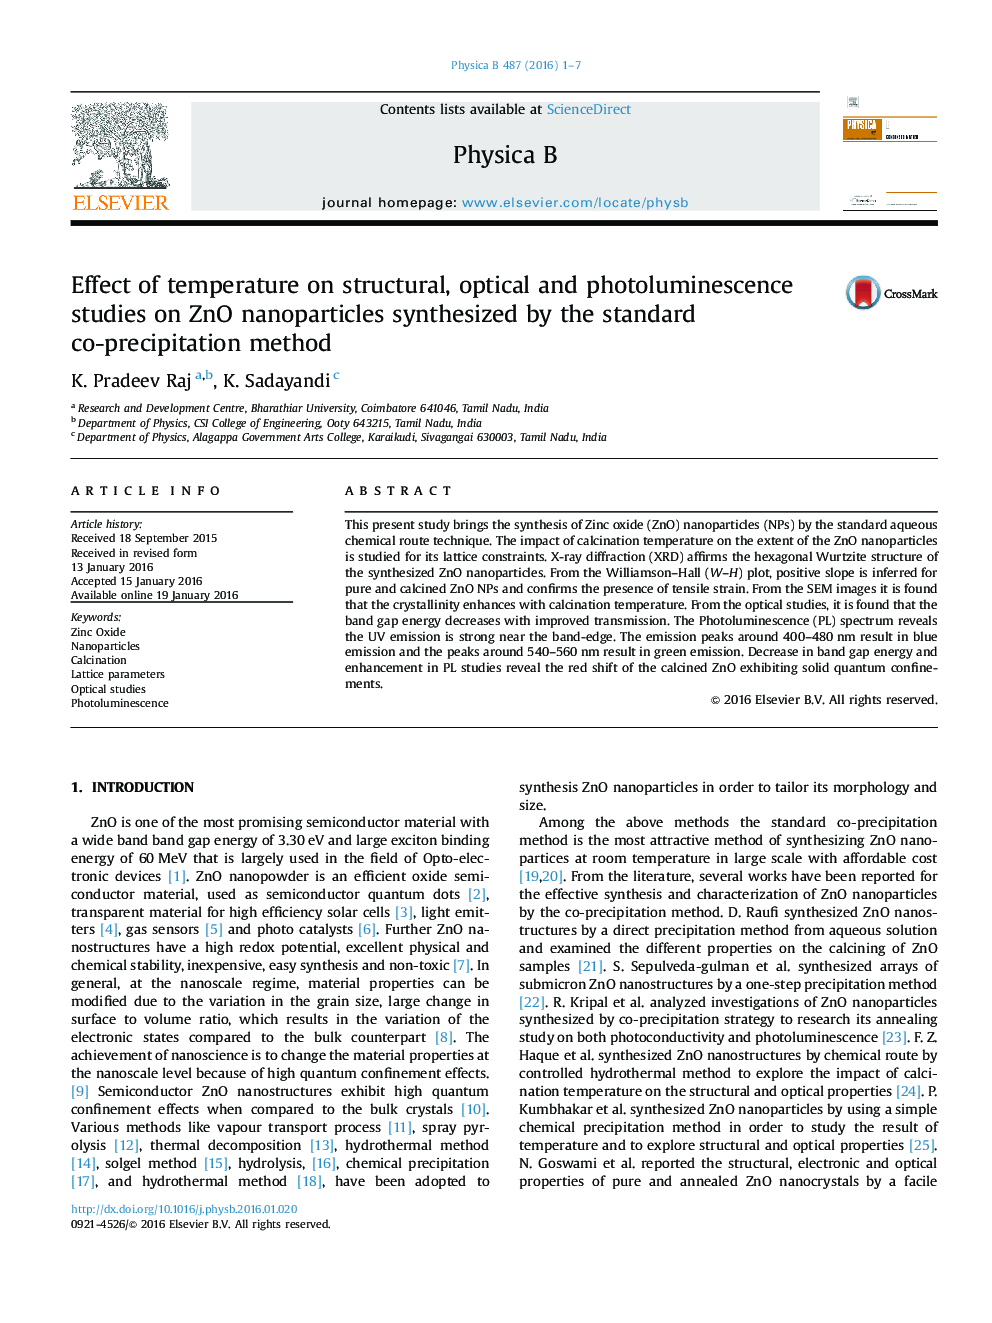 Effect of temperature on structural, optical and photoluminescence studies on ZnO nanoparticles synthesized by the standard co-precipitation method